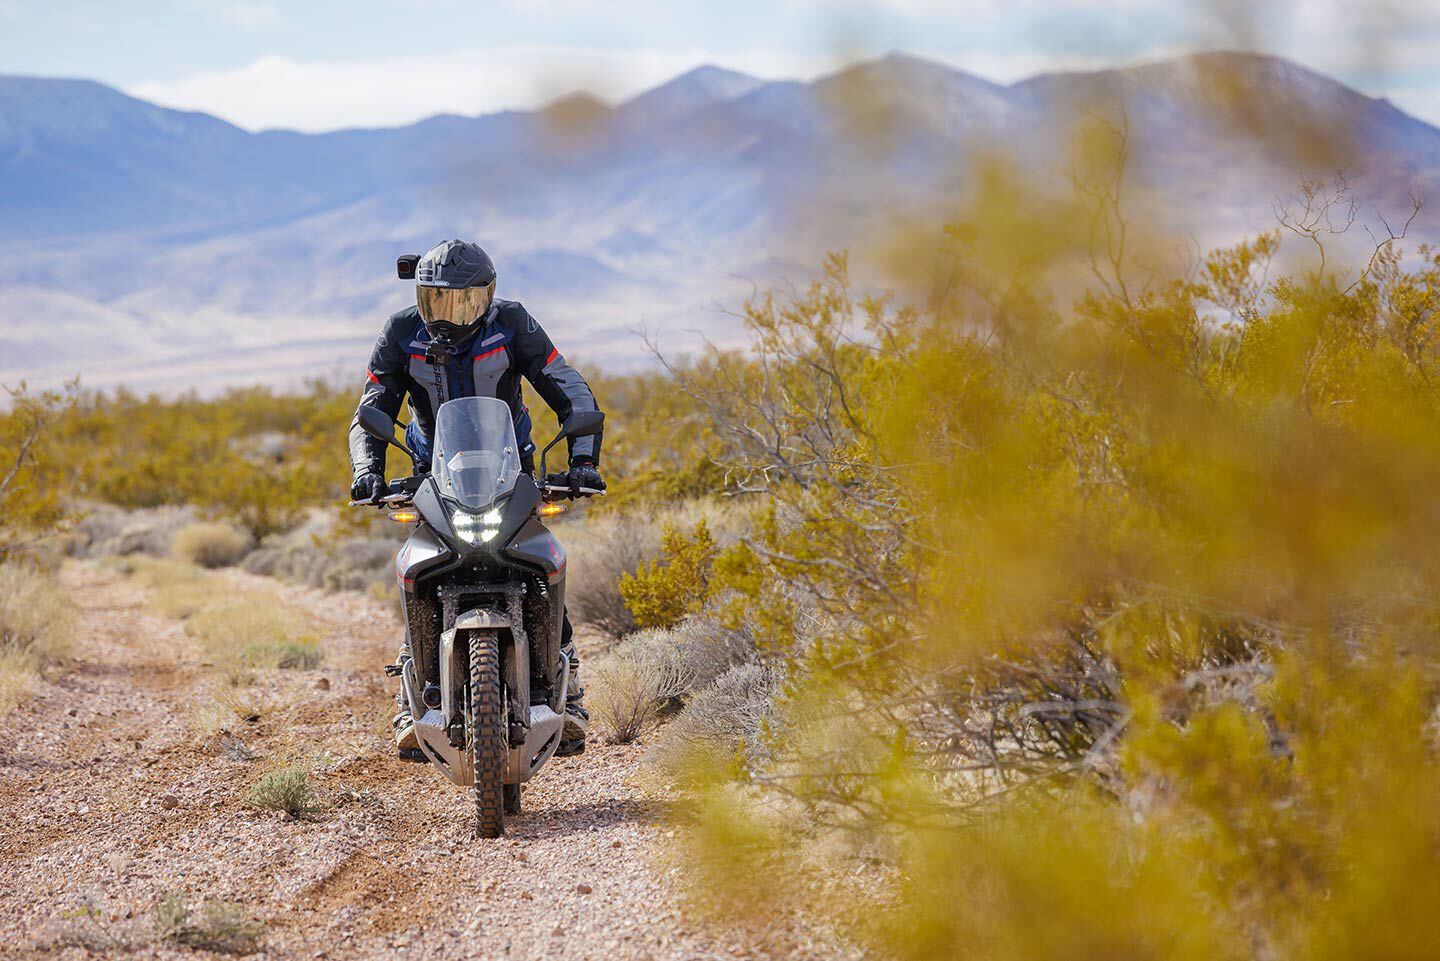 Tech-Air off-road is user serviceable so the owner can replace spent gas cartridges. The airbag’s bladder requires service by Alpinestars after the fourth deployment.